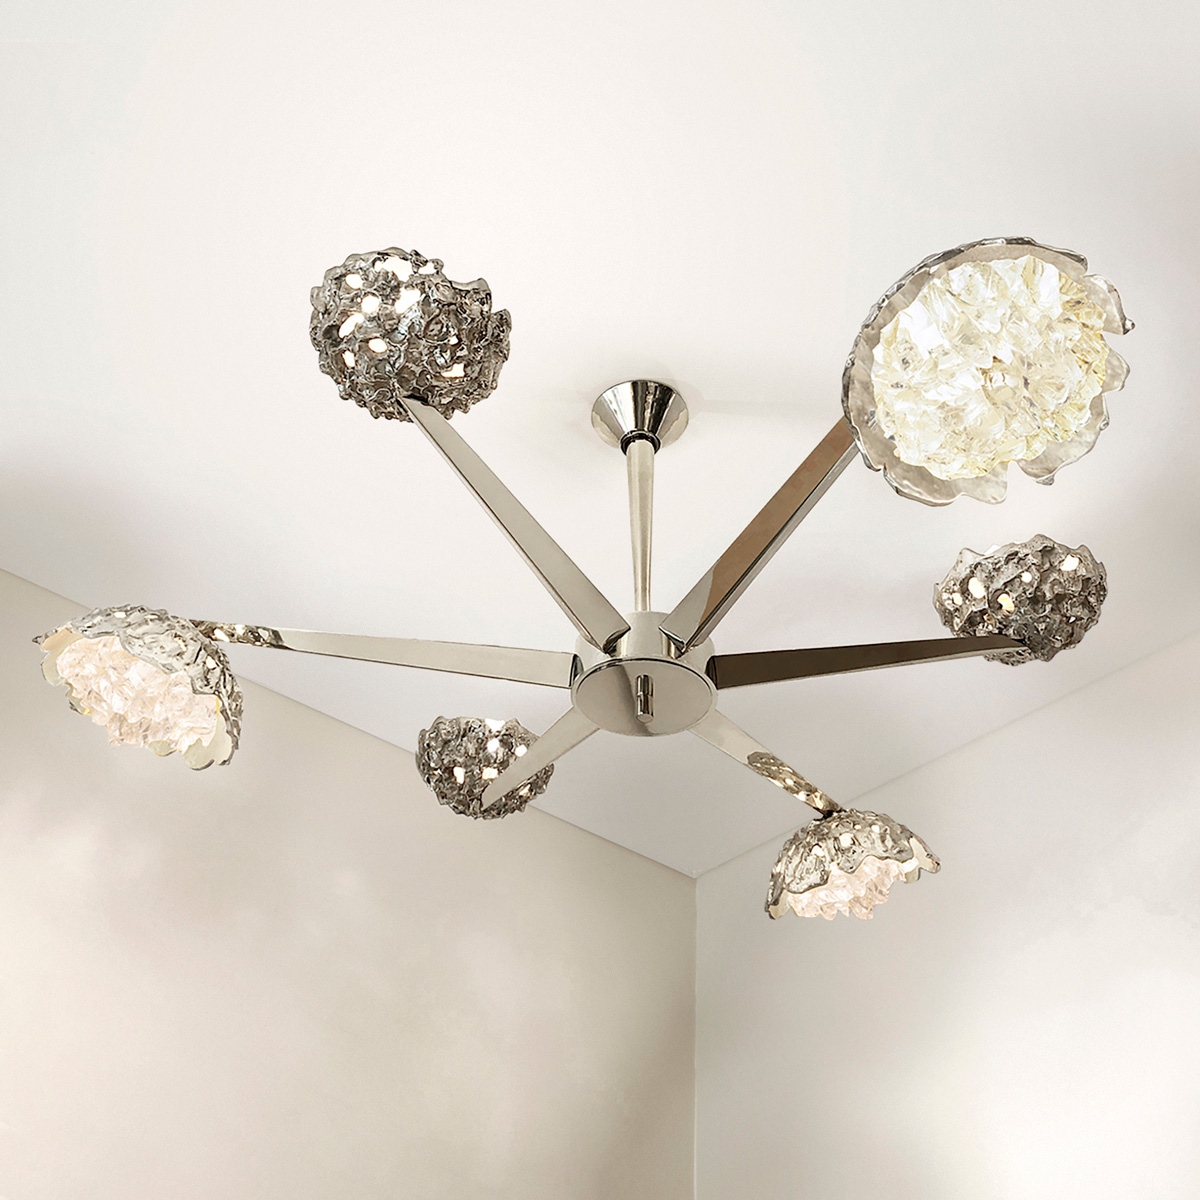 Fusione Ceiling Light by gaspare asaro